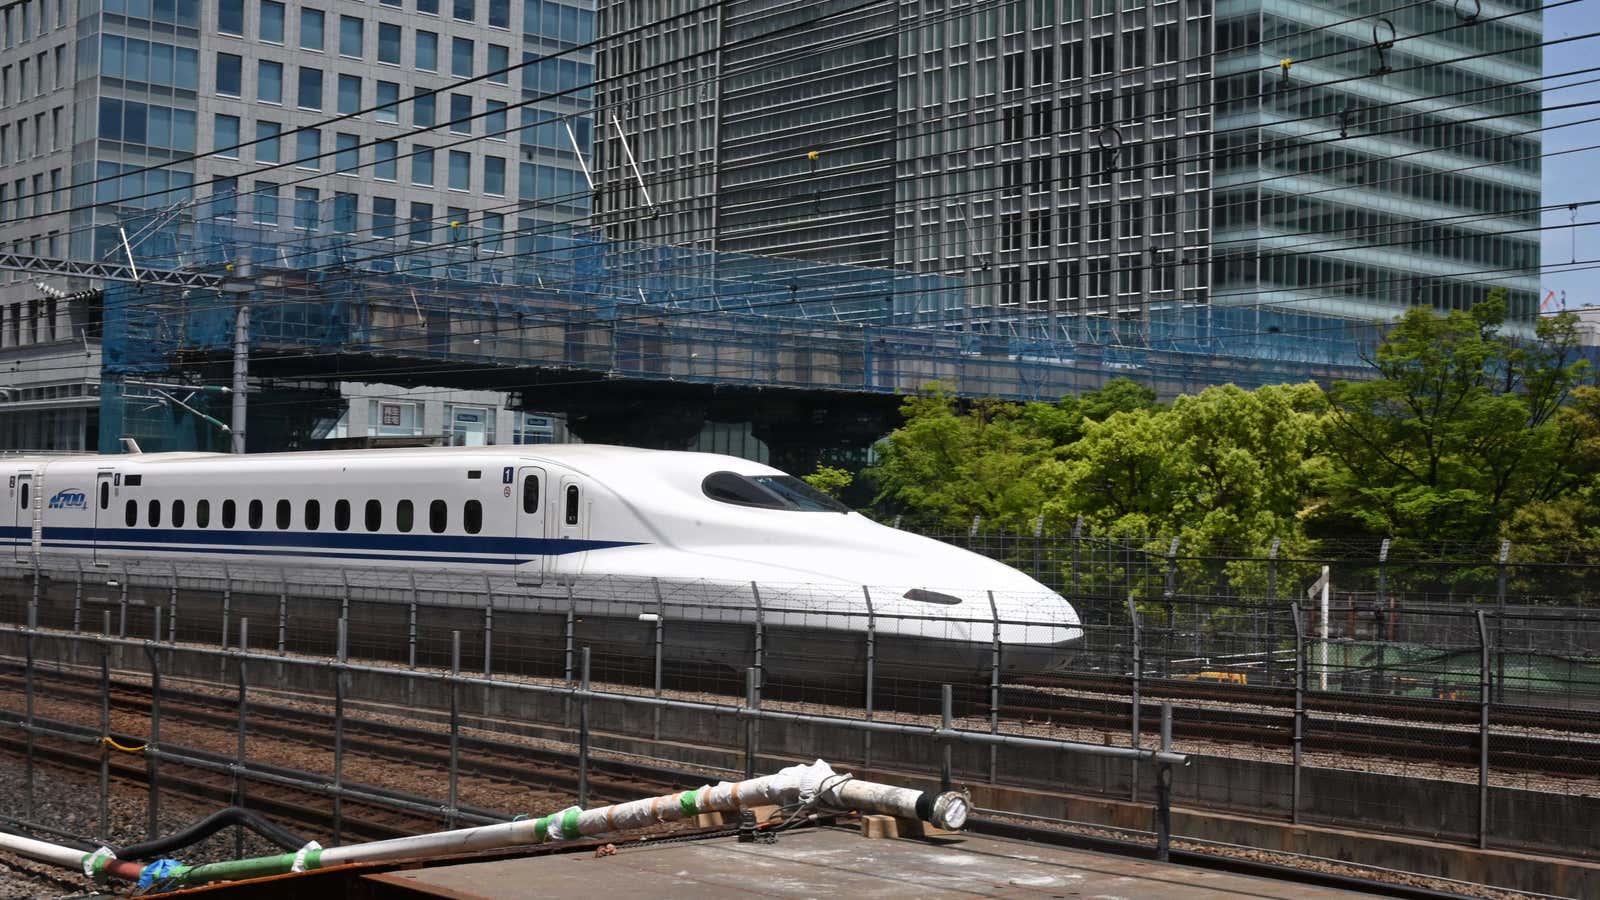 The new trains connecting Dallas and Houston will be modeled after this  Shinkansen train in Japan.